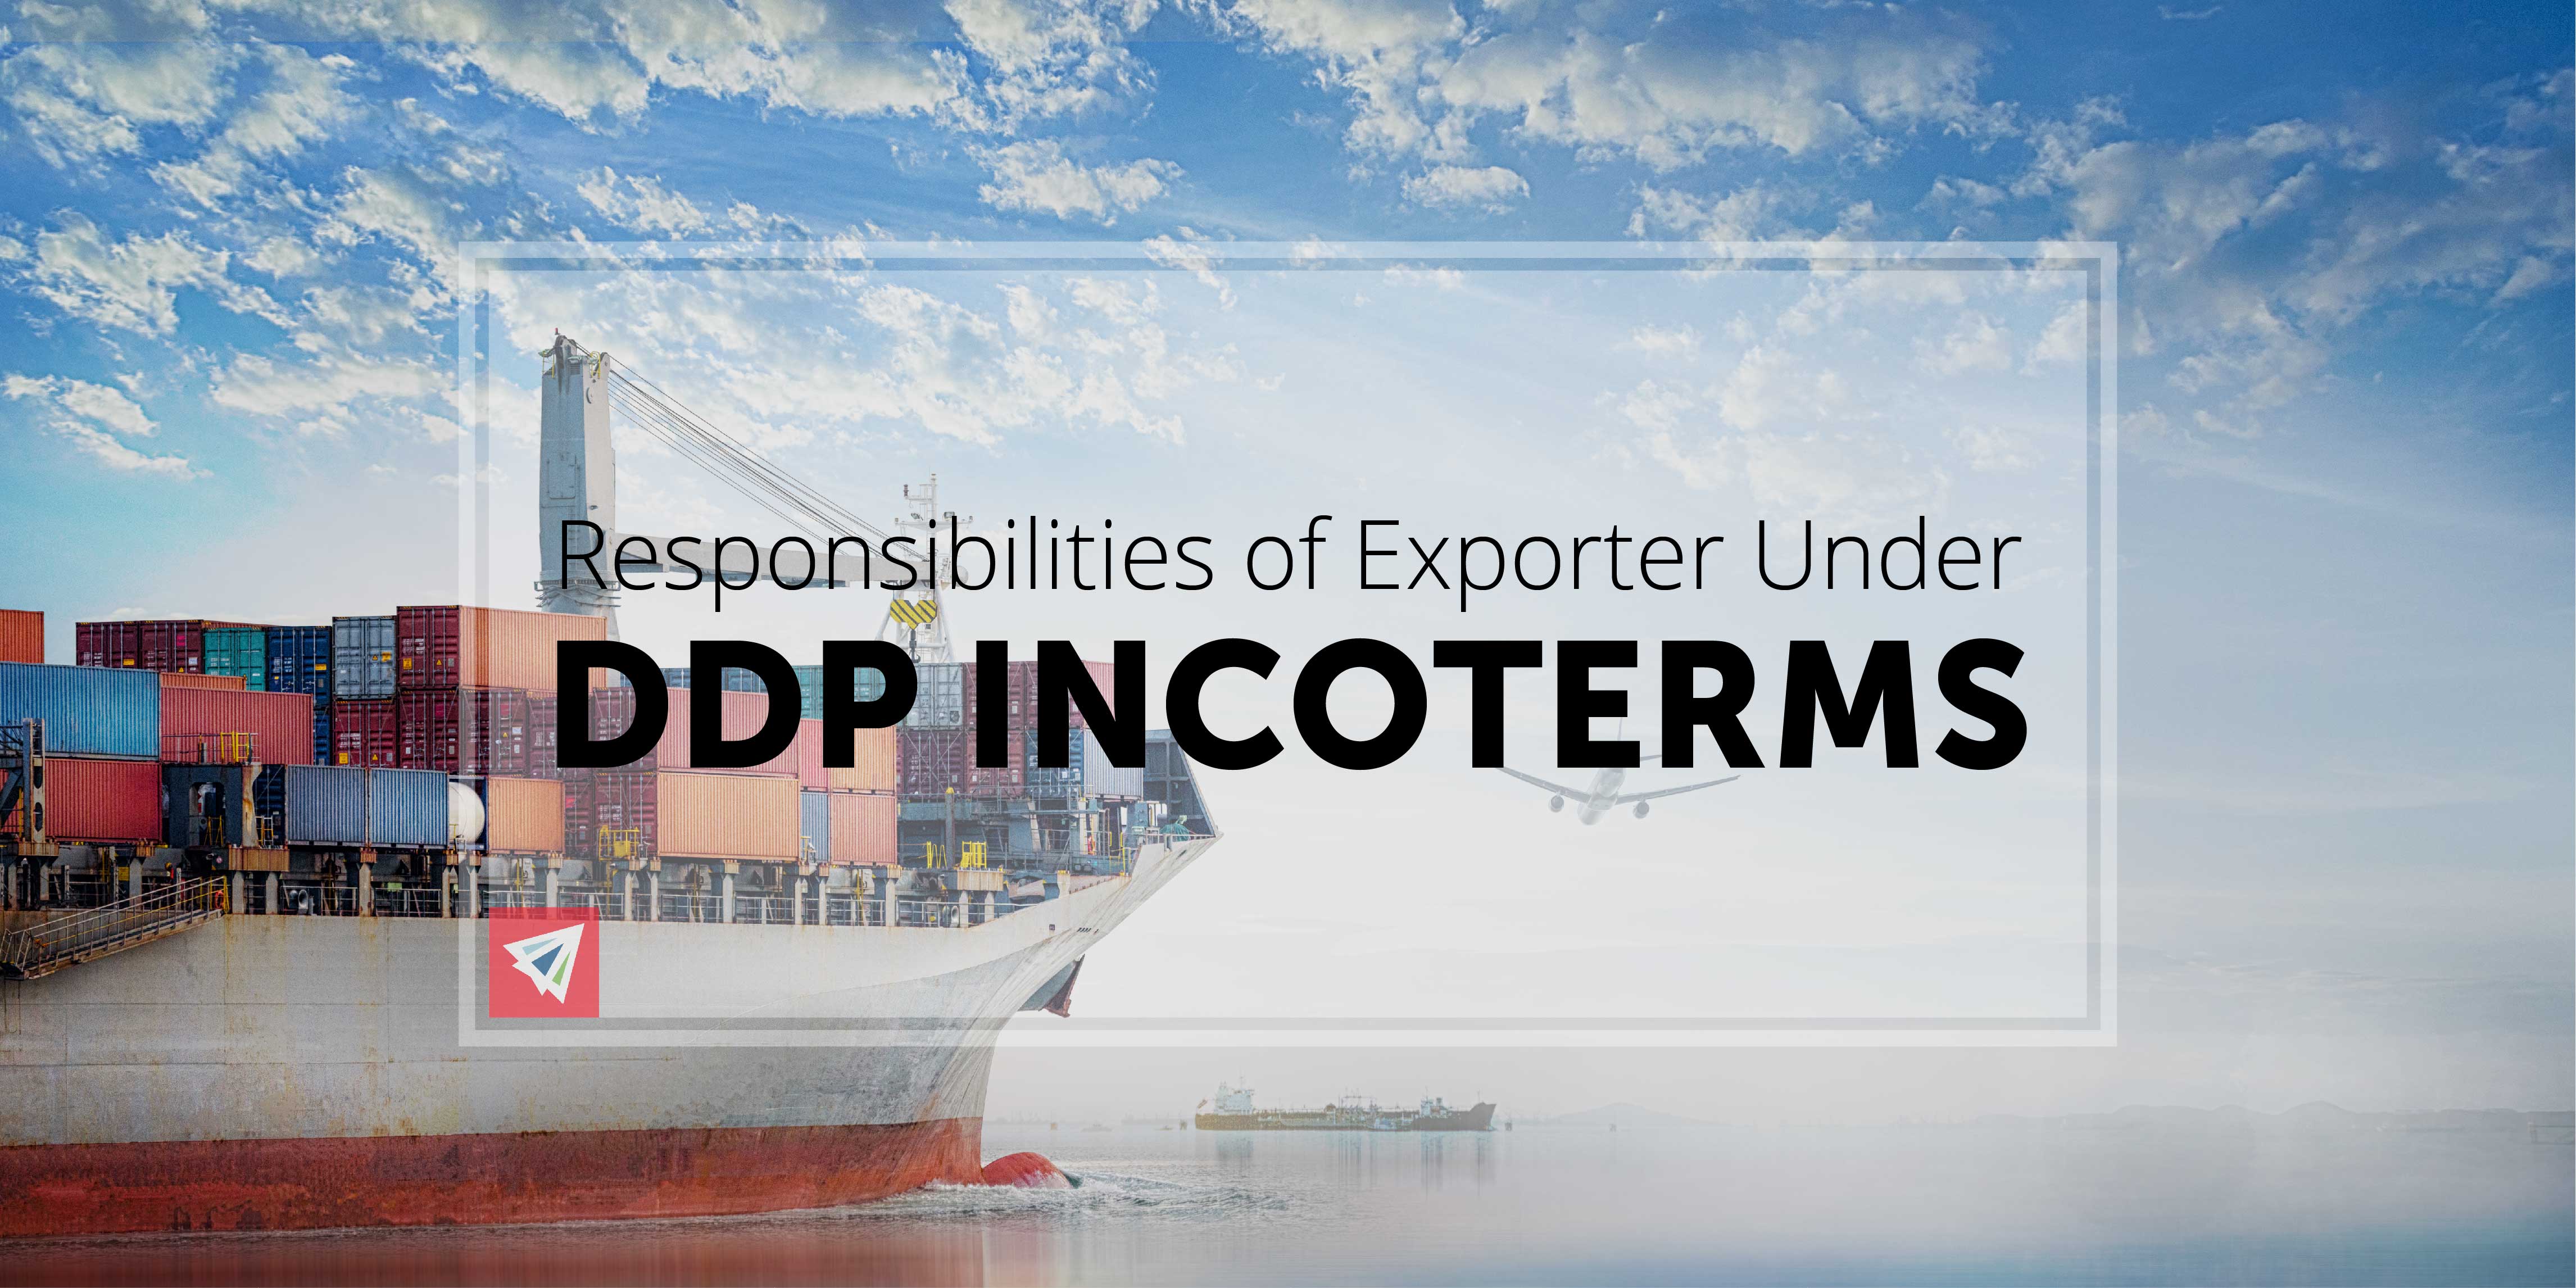 Responsibilities of the Exporter under DDP Incoterms